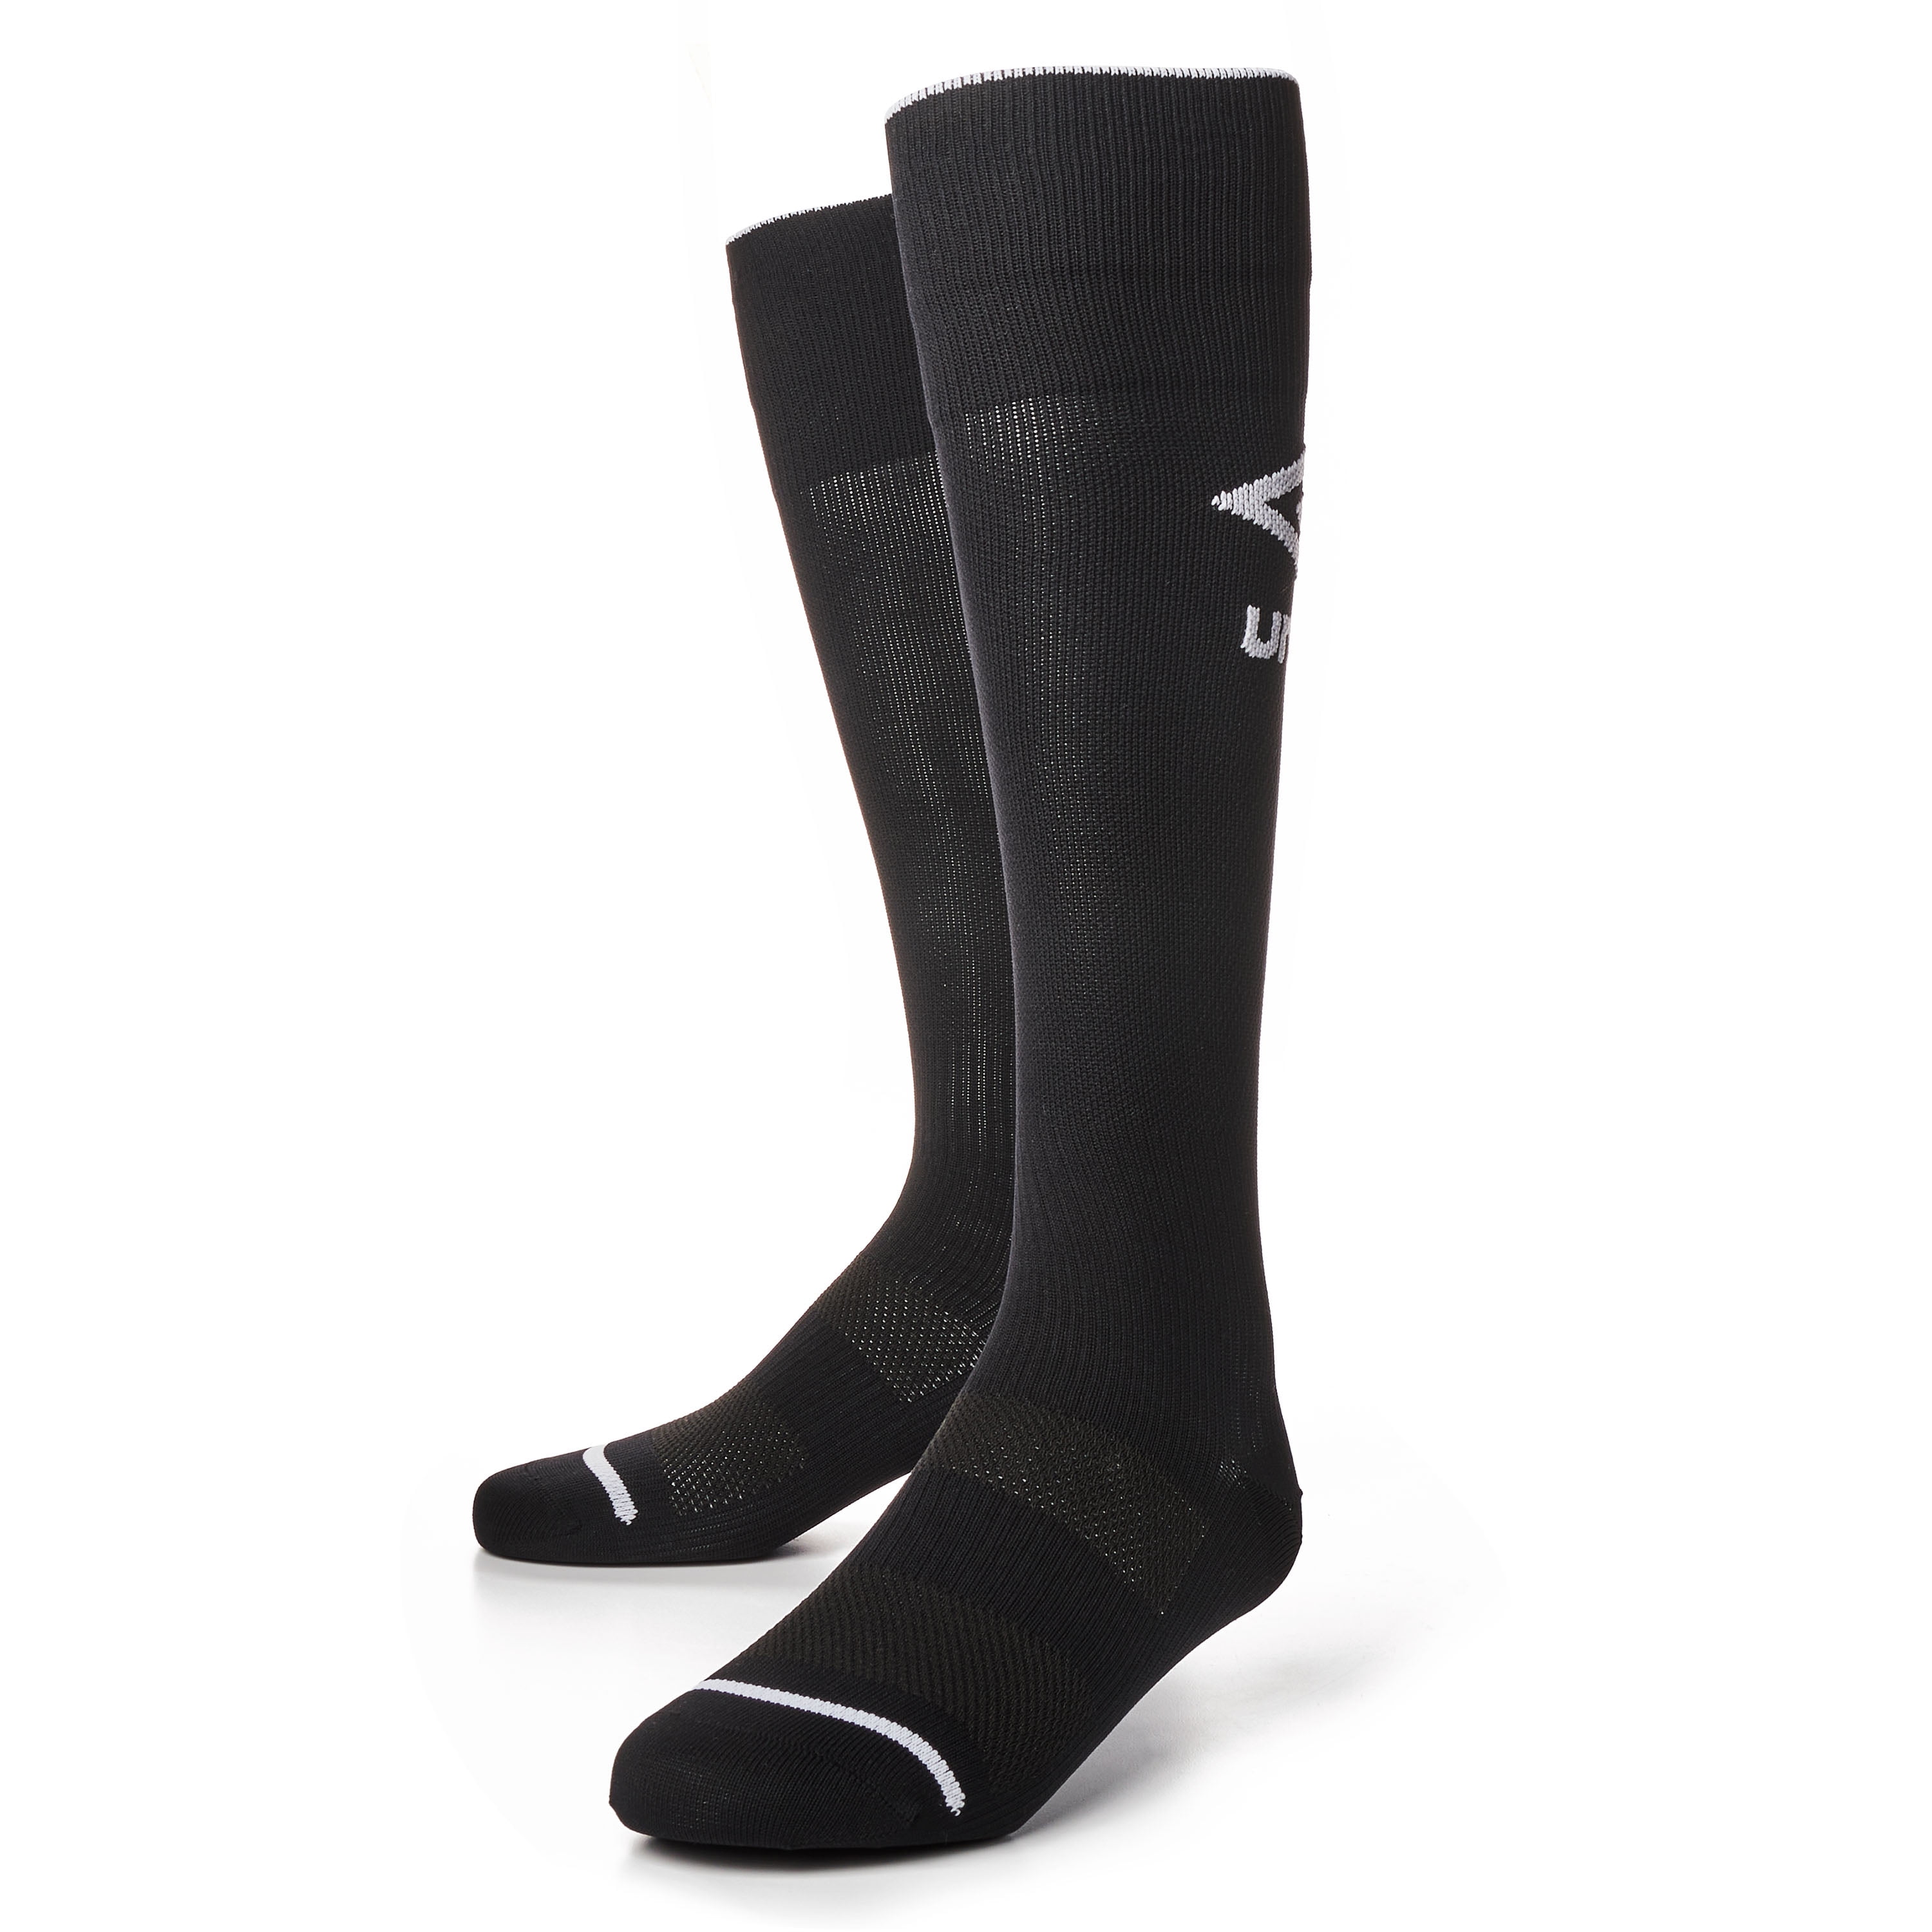 3 Pack For Youth Unisex Soccer Sports Team Socks and a pair of gift shin guard 